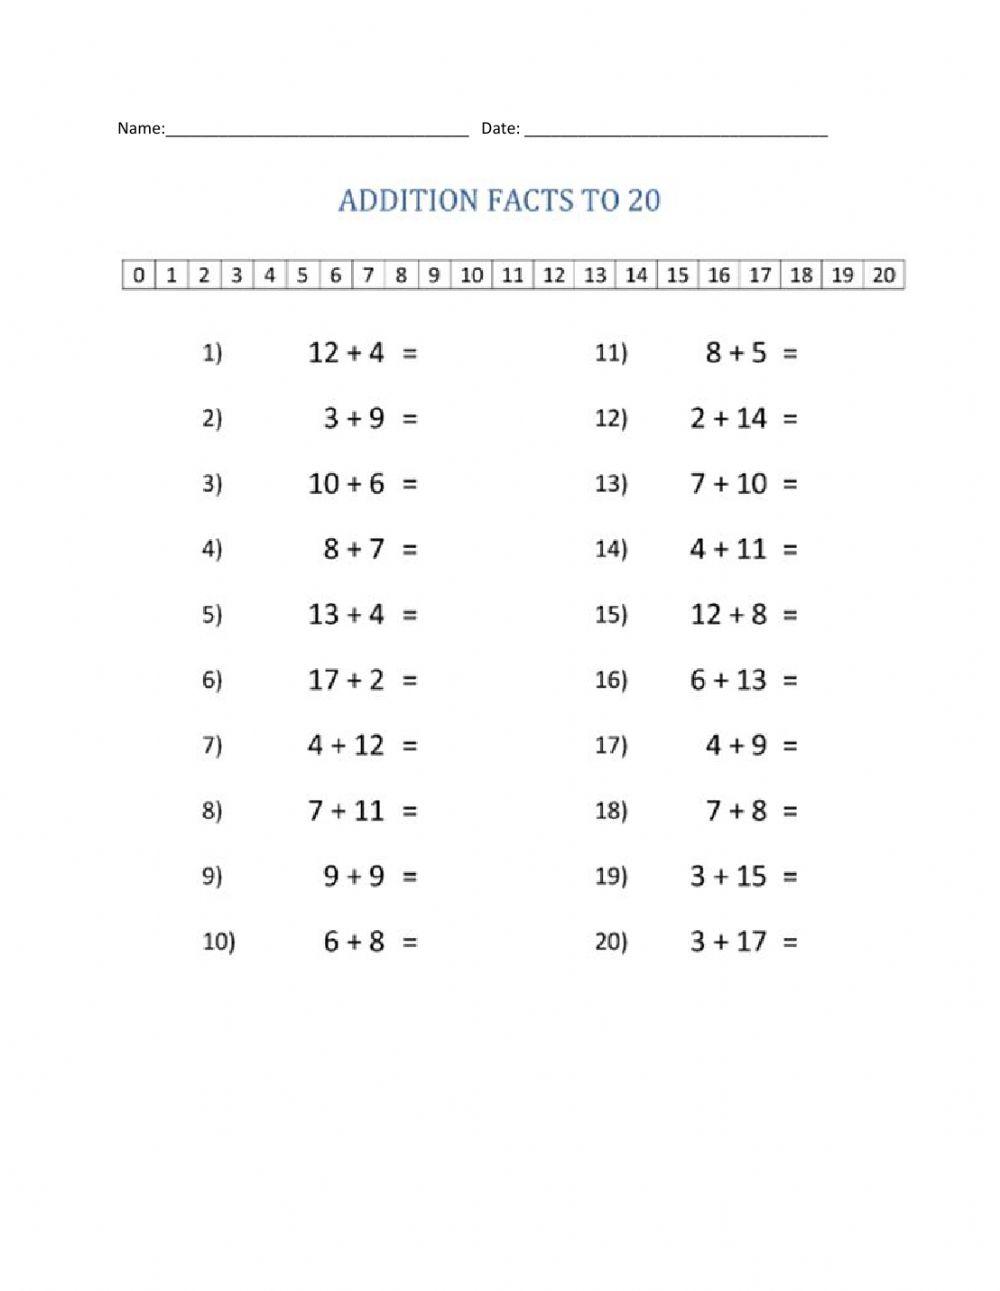 Addition fact to 20 group2